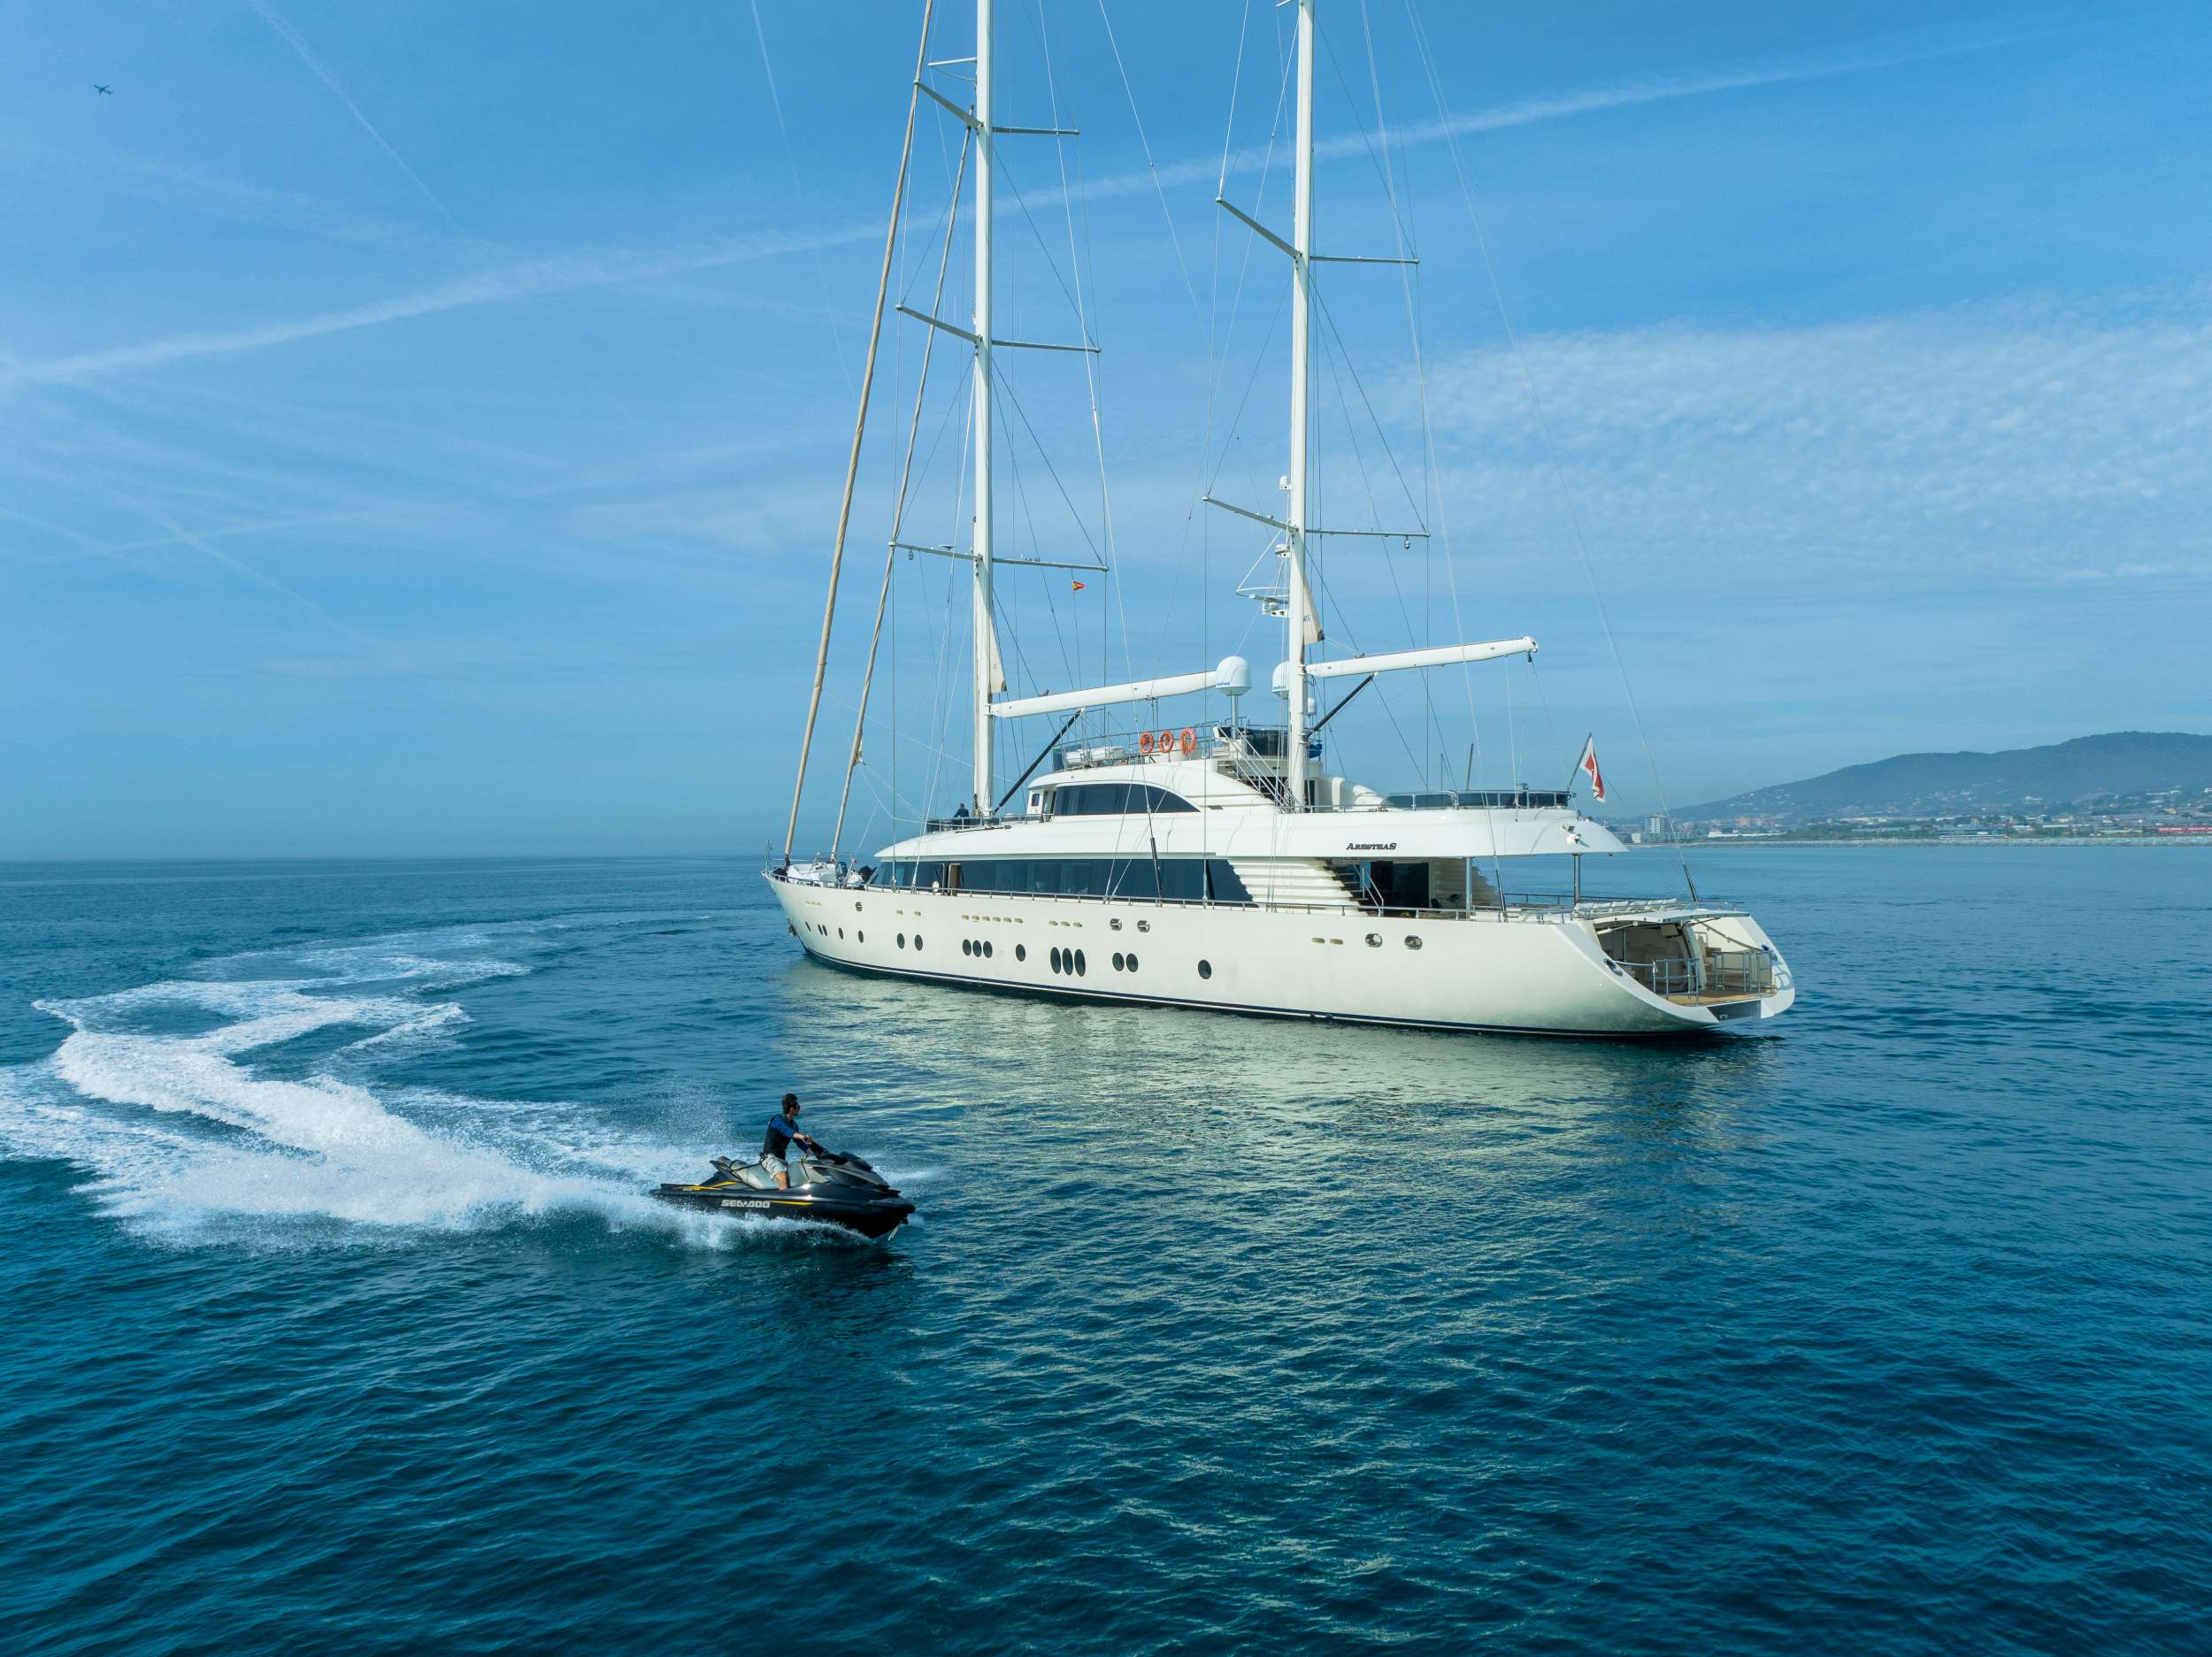 ARESTEAS - Yacht Charter Zaton & Boat hire in W. Med -Naples/Sicily, W. Med -Riviera/Cors/Sard., W. Med - Spain/Balearics 1